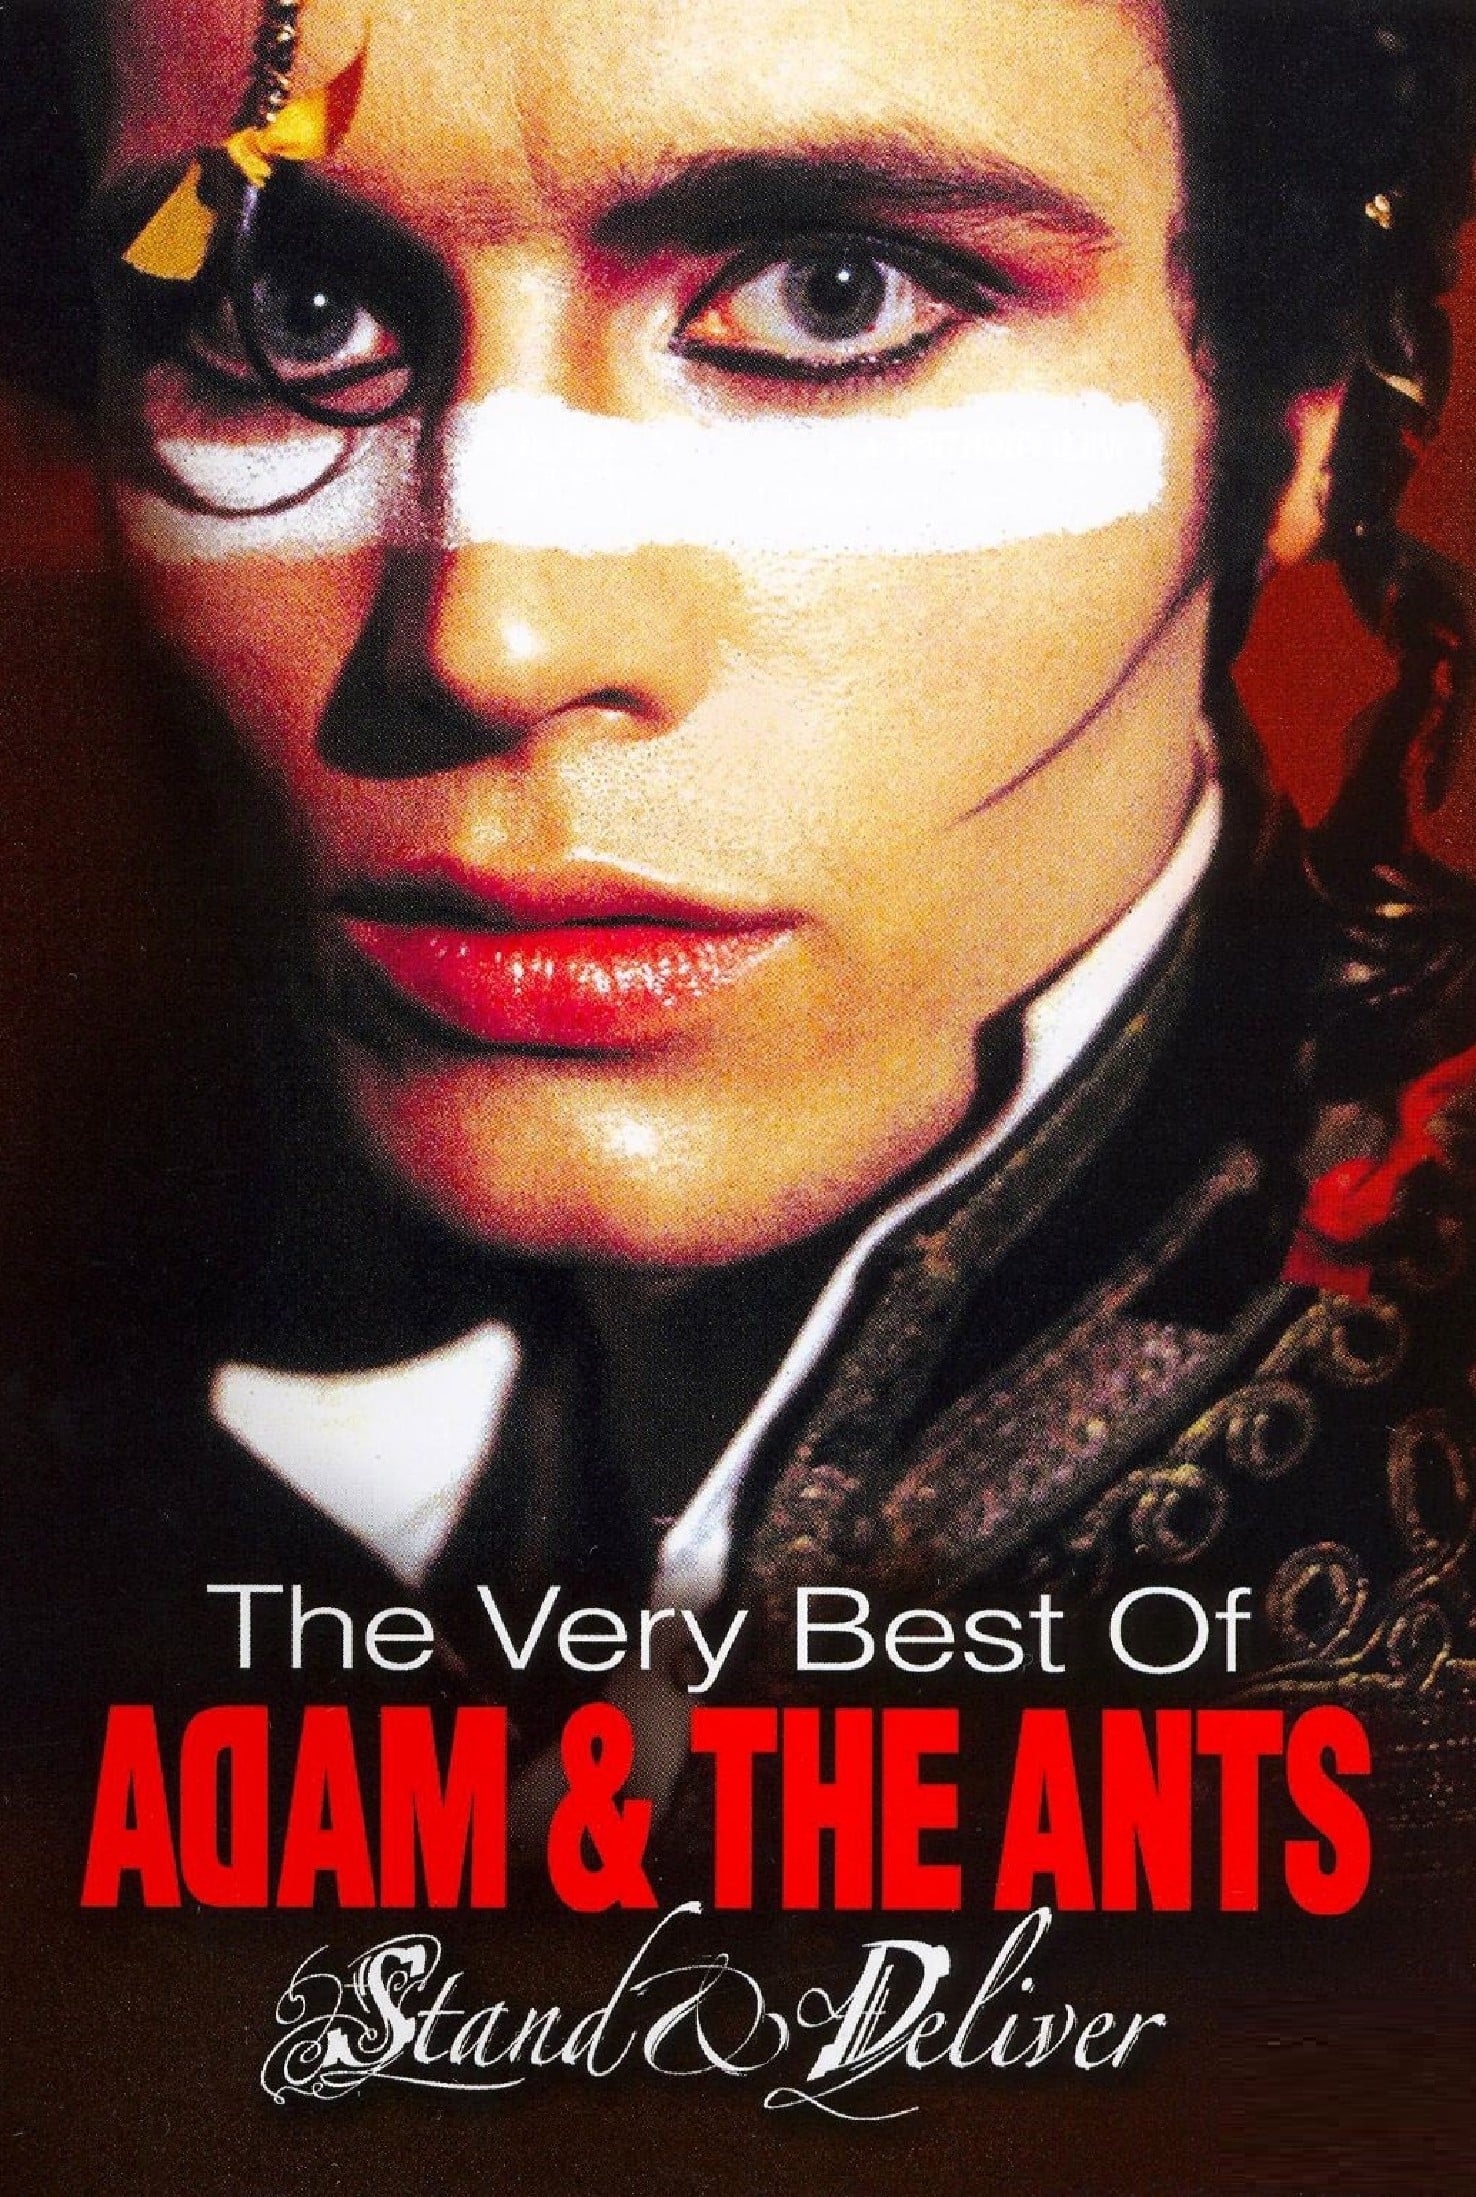 Stand & Deliver: The Very Best of Adam & The Ants